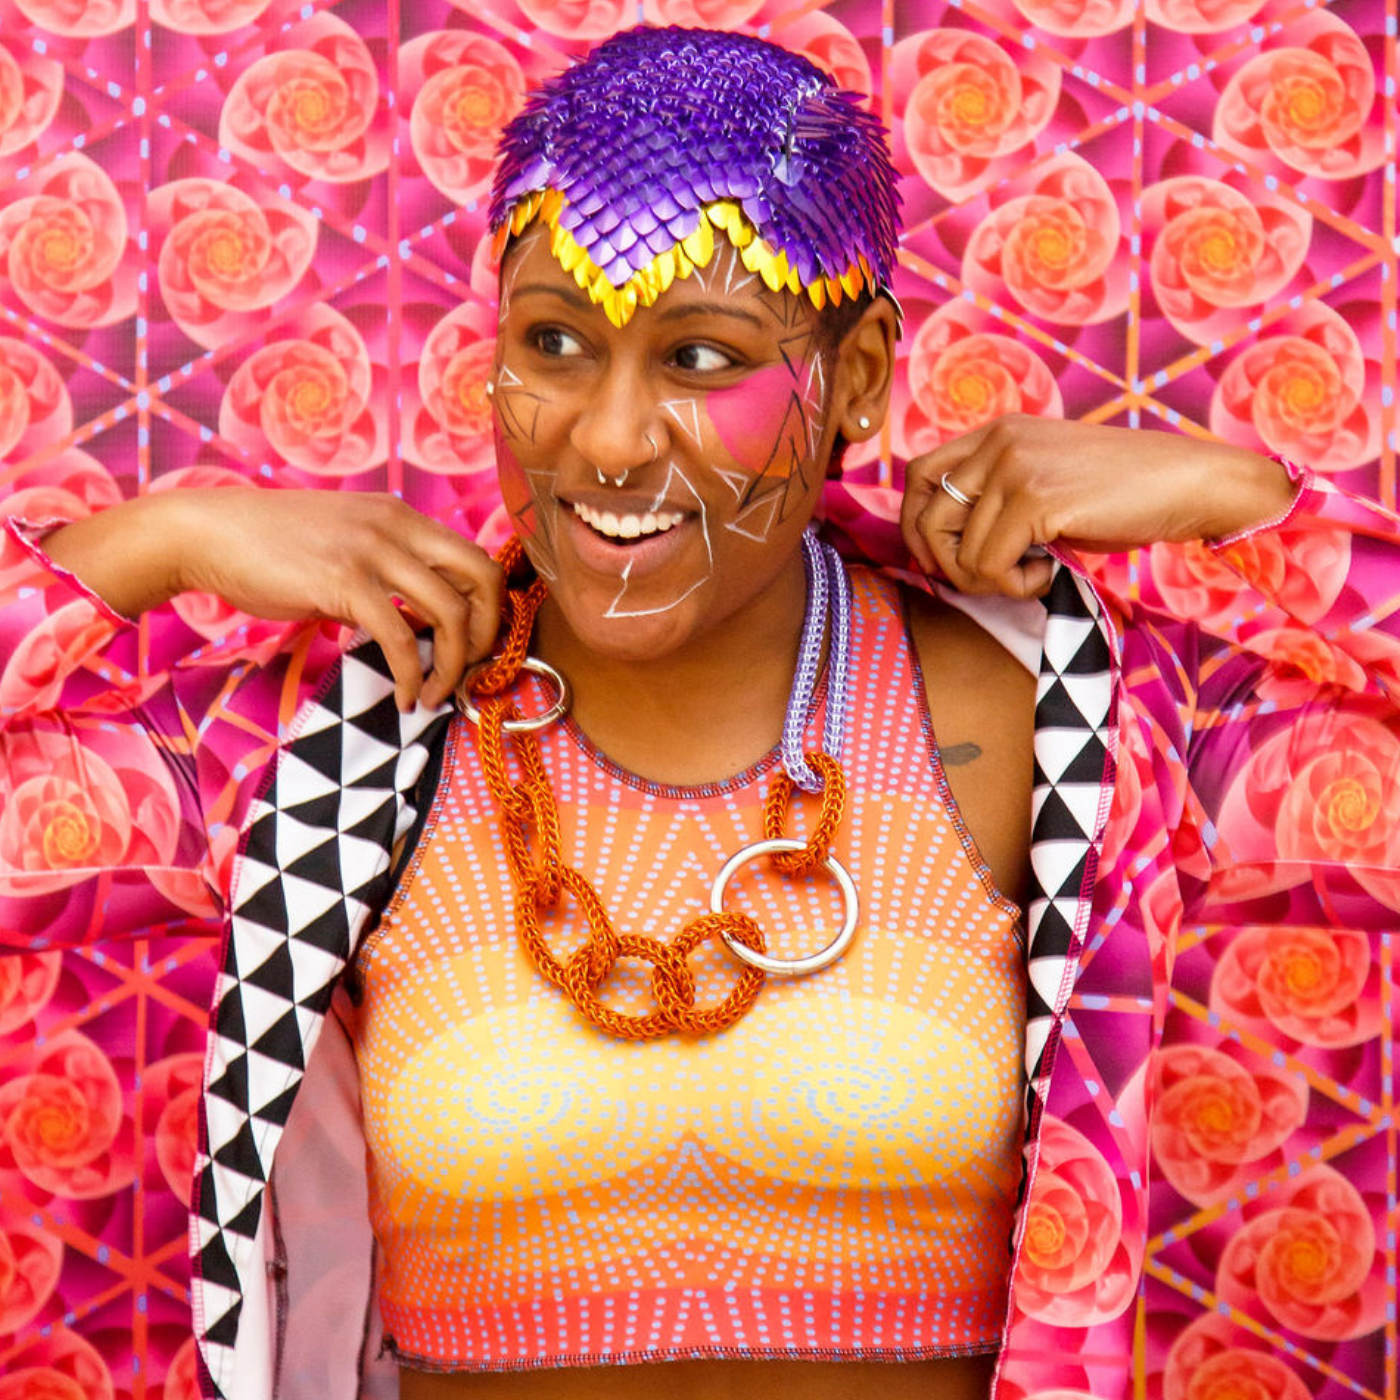 Ashley Olivia Morton stands in front of a bright orange and magenta wall with swirls, wearing a vest in the same pattern.